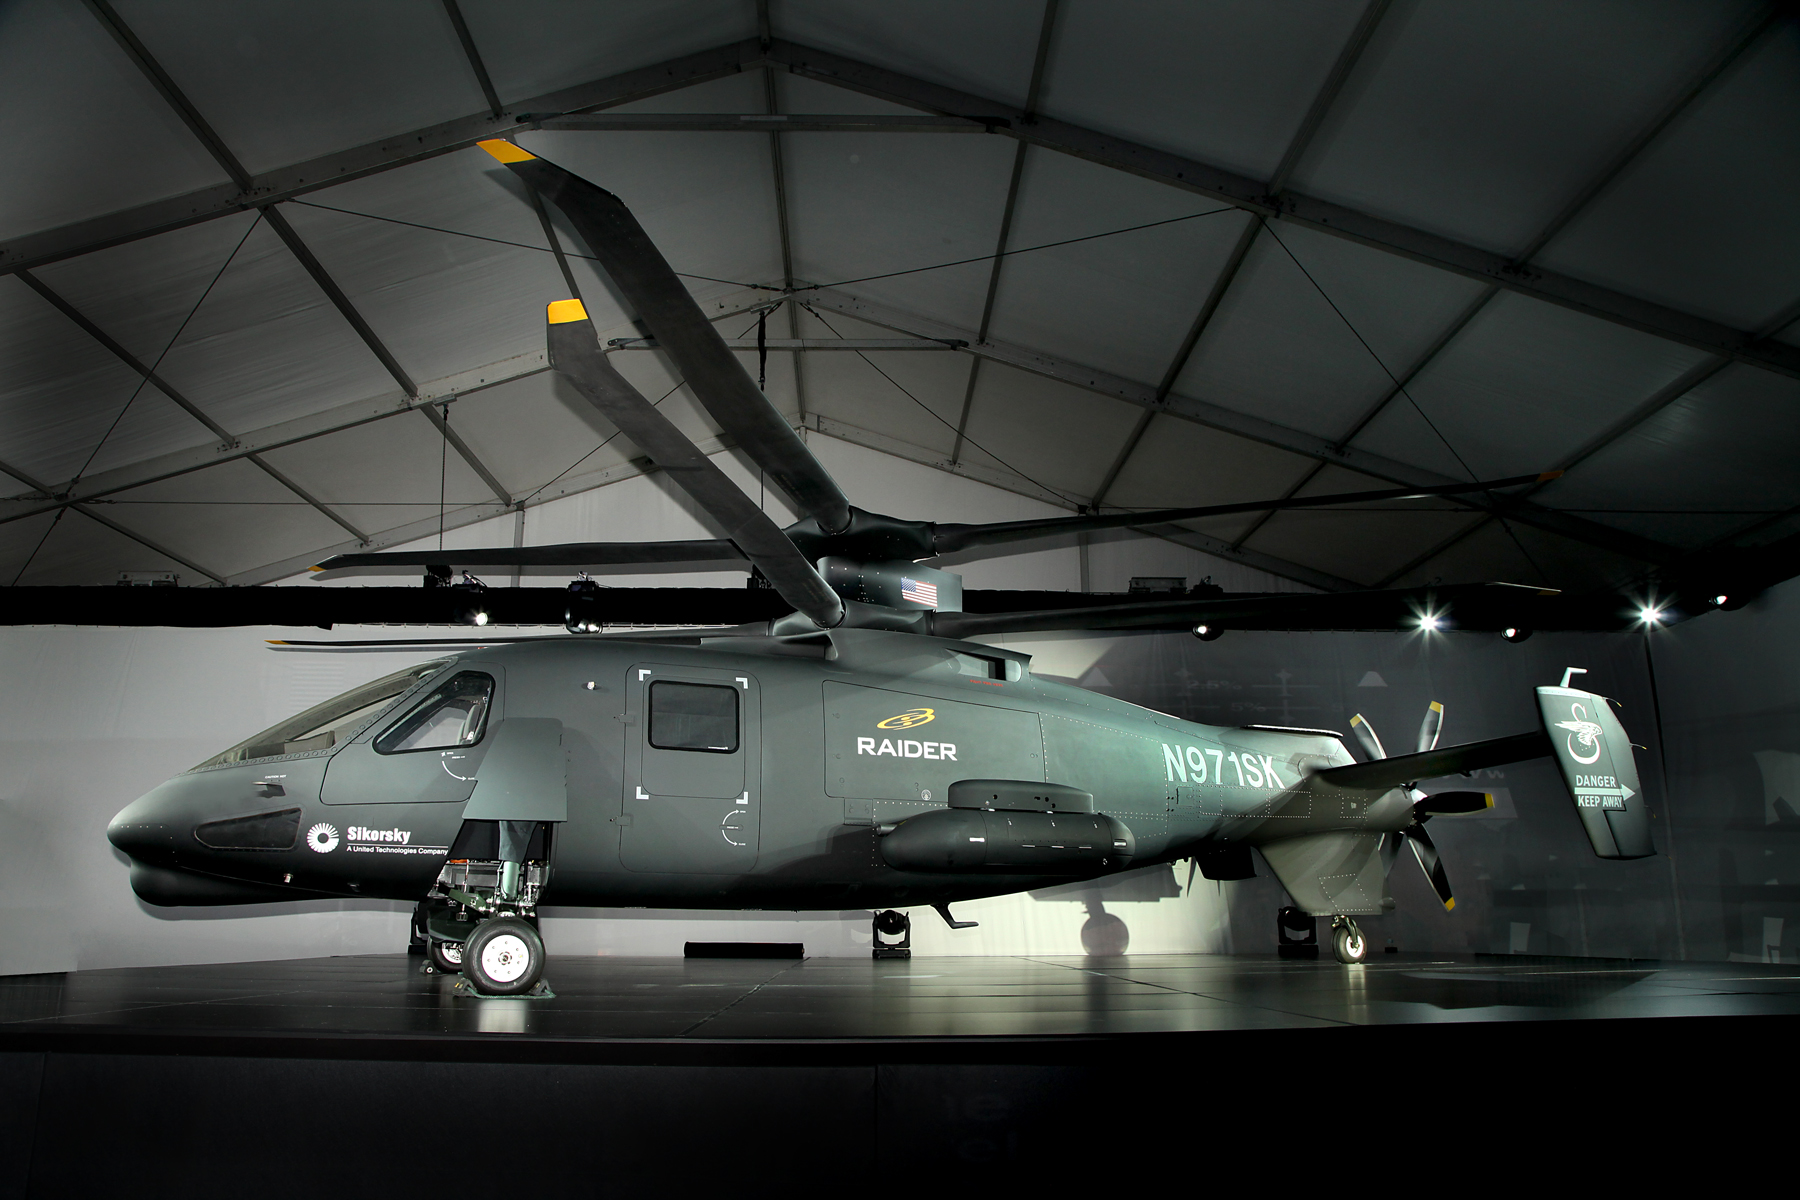 New Military Helicopter Can Cruise At 253 MPH